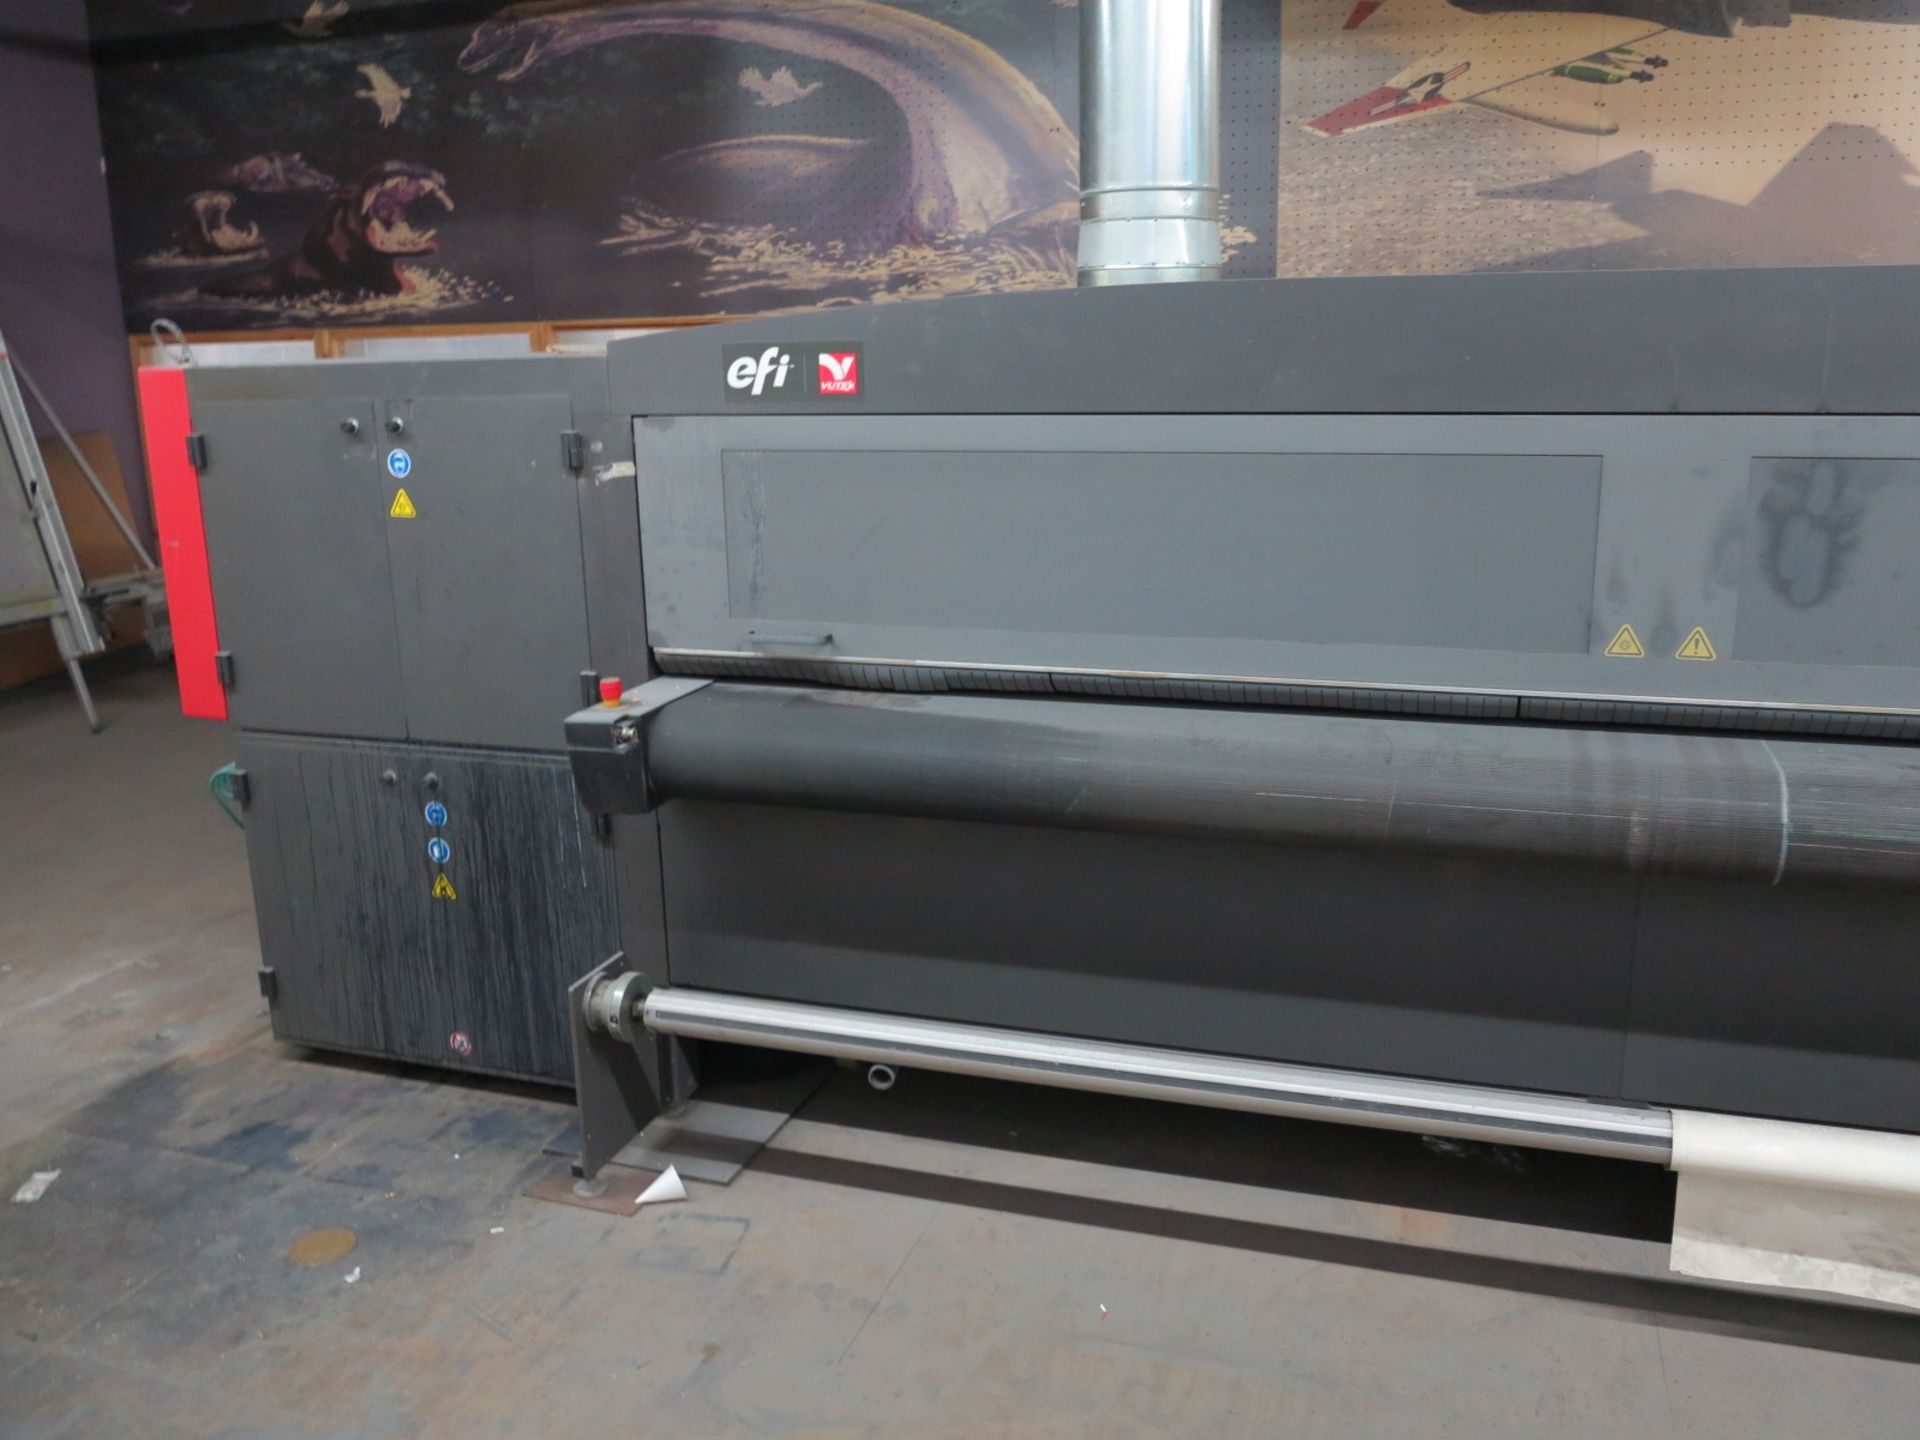 2012 EFI VUTEK QS3220 SUPER LARGE FORMAT PRINTER, FOR RIDGID AND ROLL-TO-ROLL PRINTING, S/N 630312 - Image 3 of 5